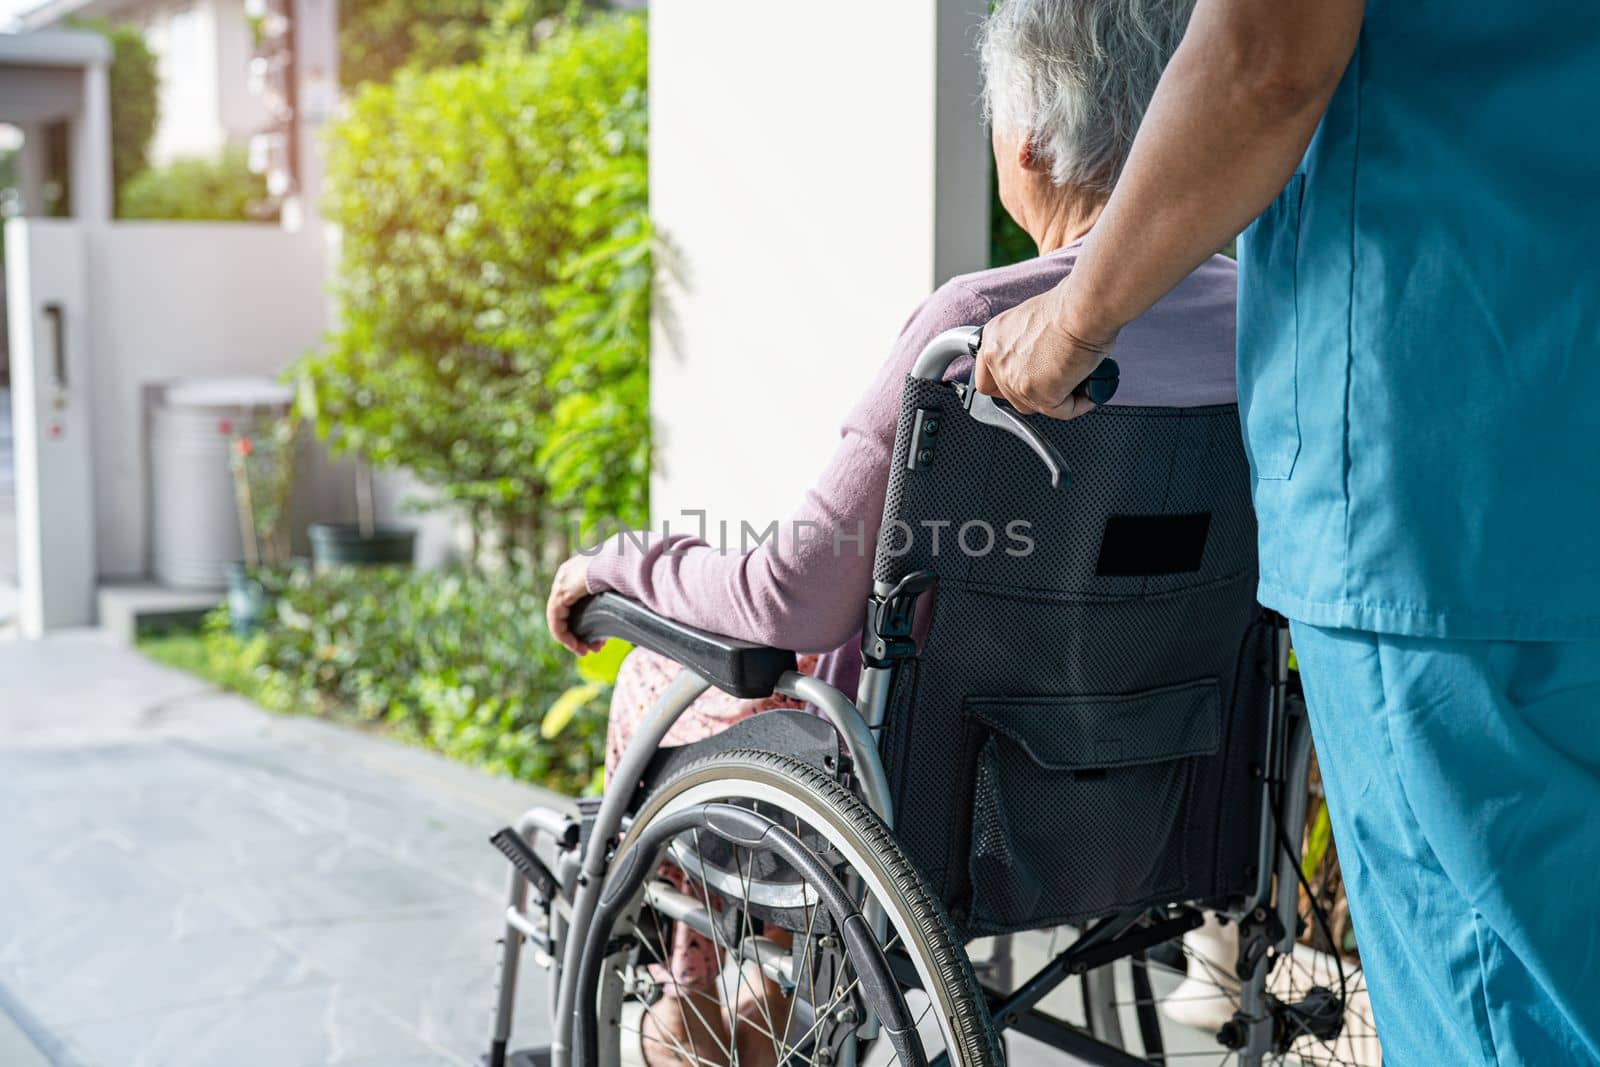 Caregiver help and care Asian senior or elderly old lady woman patient sitting in wheelchair on ramp at nursing hospital, healthy strong medical concept by pamai